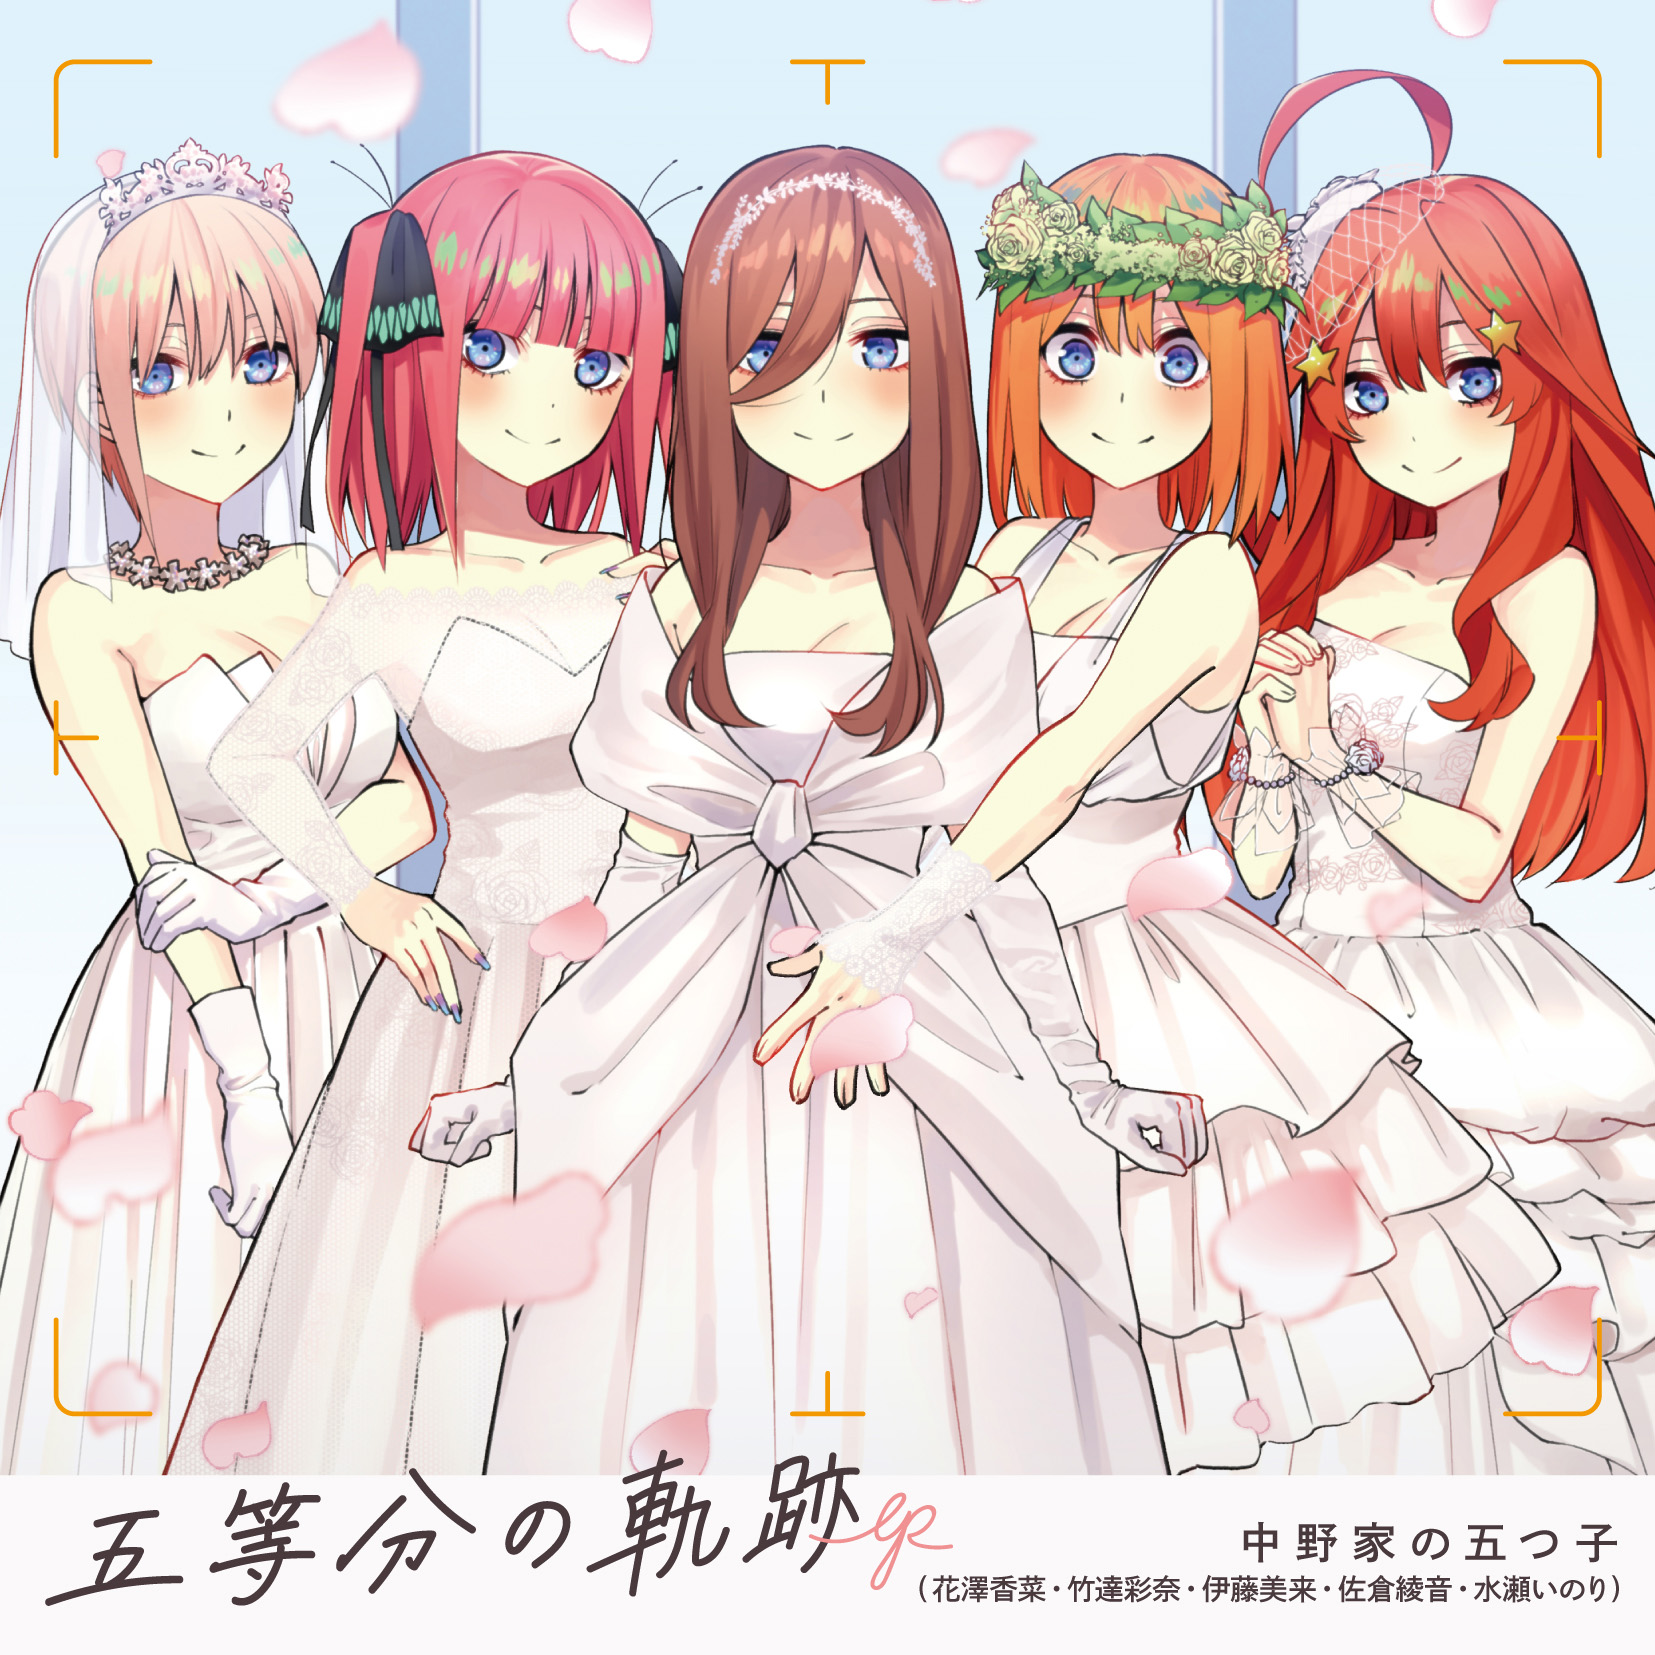 The Quintessential Quintuplets Anime Ending Isn't Perfect and Why